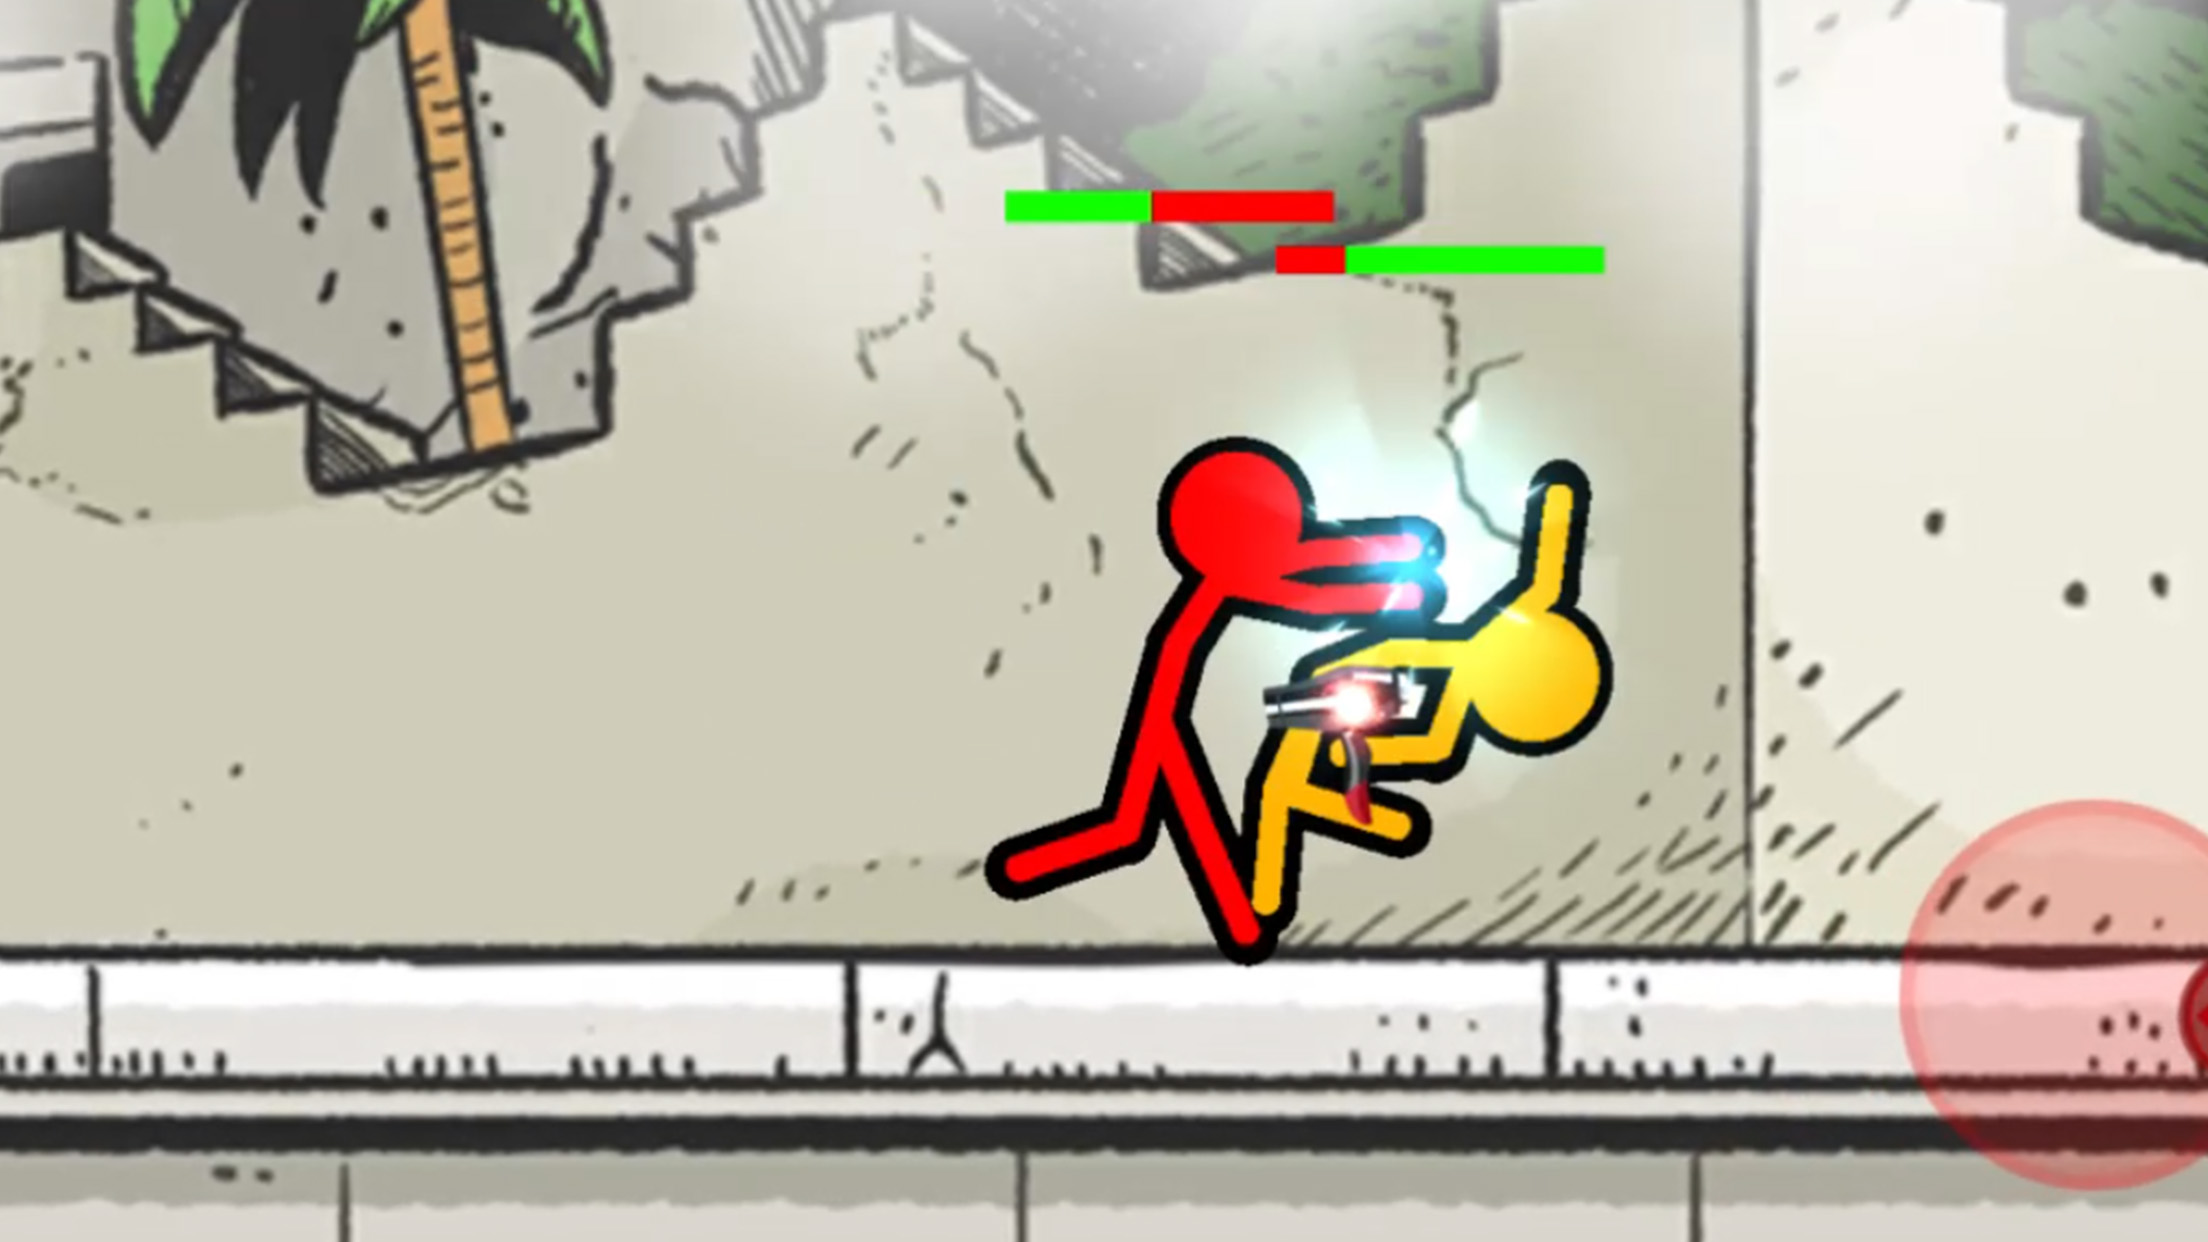 Stick Fighter for PC - Free Download & Install on Windows PC, Mac